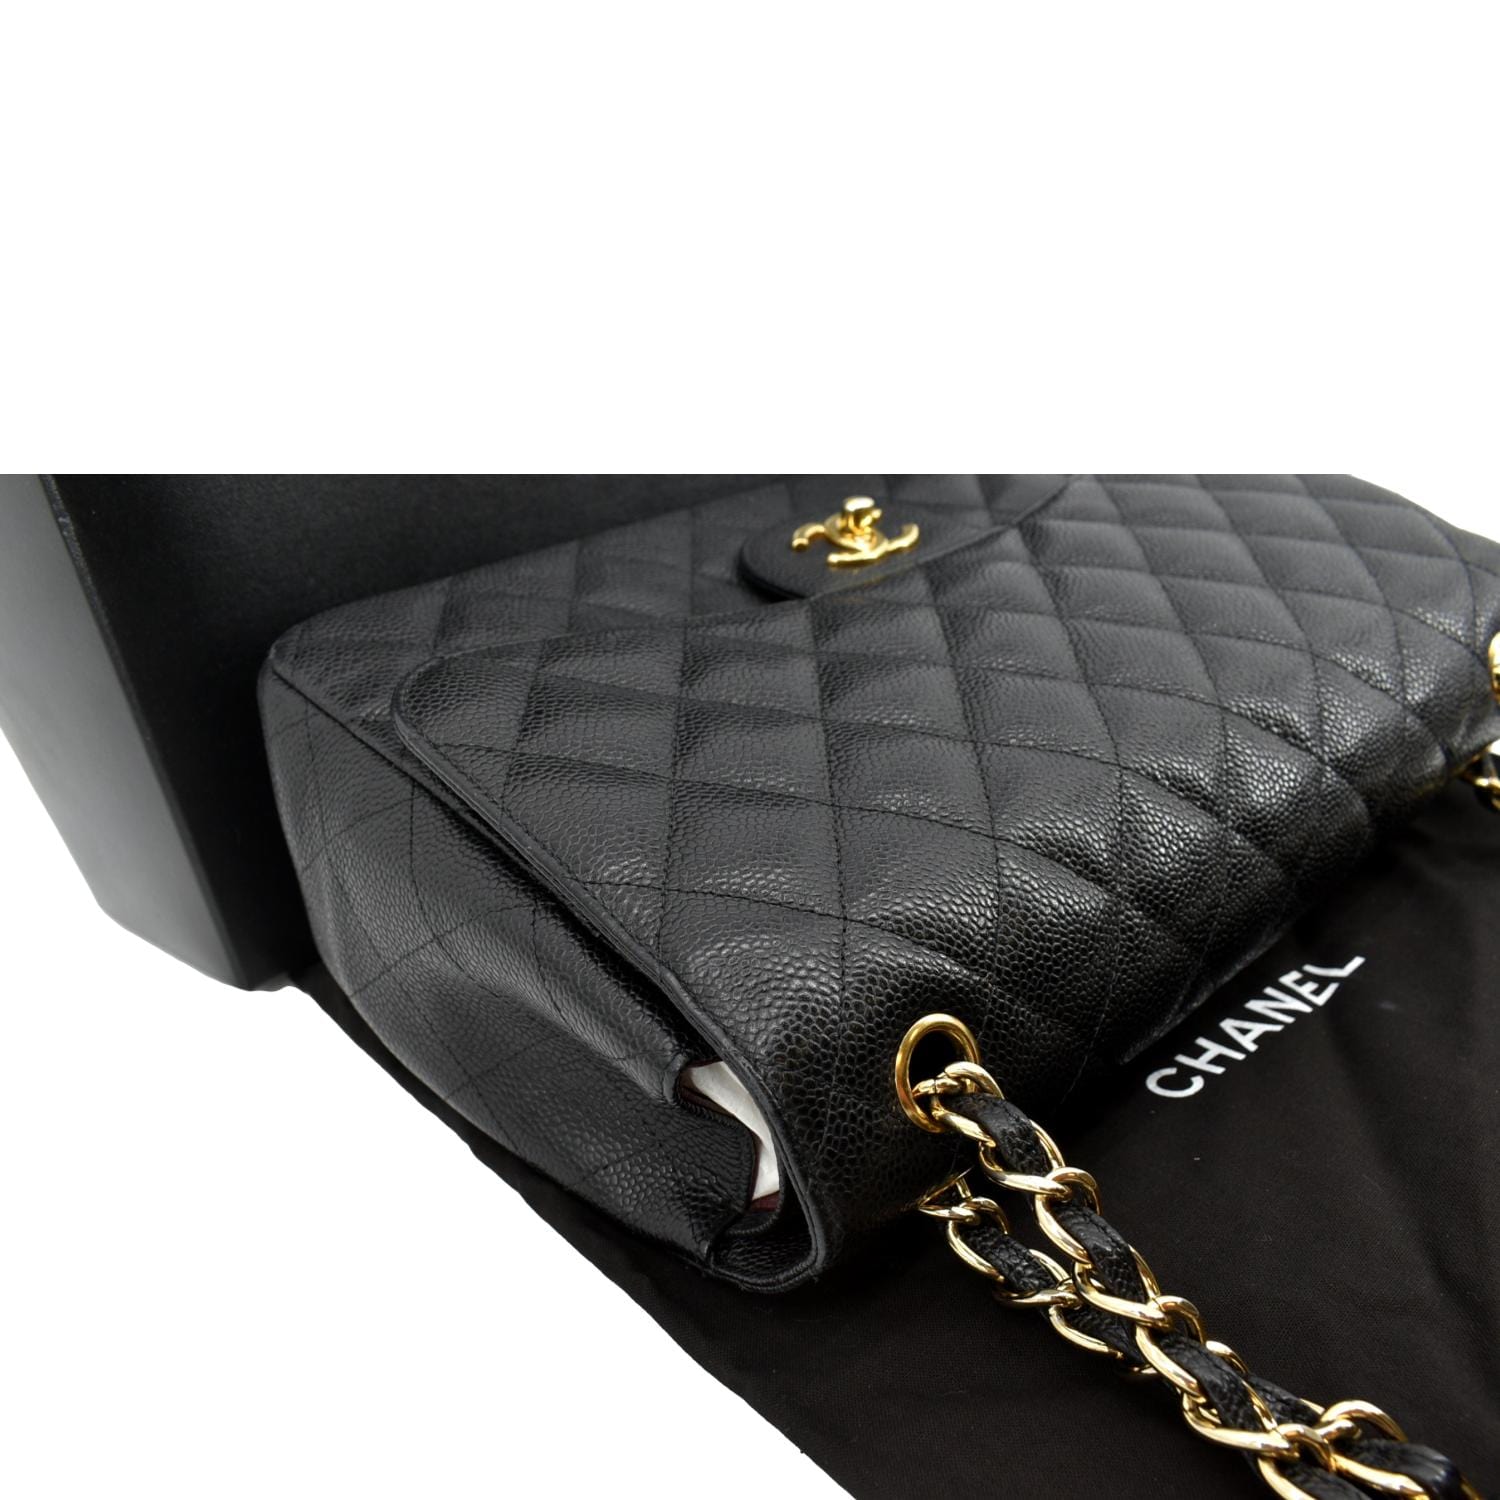 Sold at Auction: CHANEL, CLASSIC DOUBLE FLAP JUMBO SHOULDER BAG